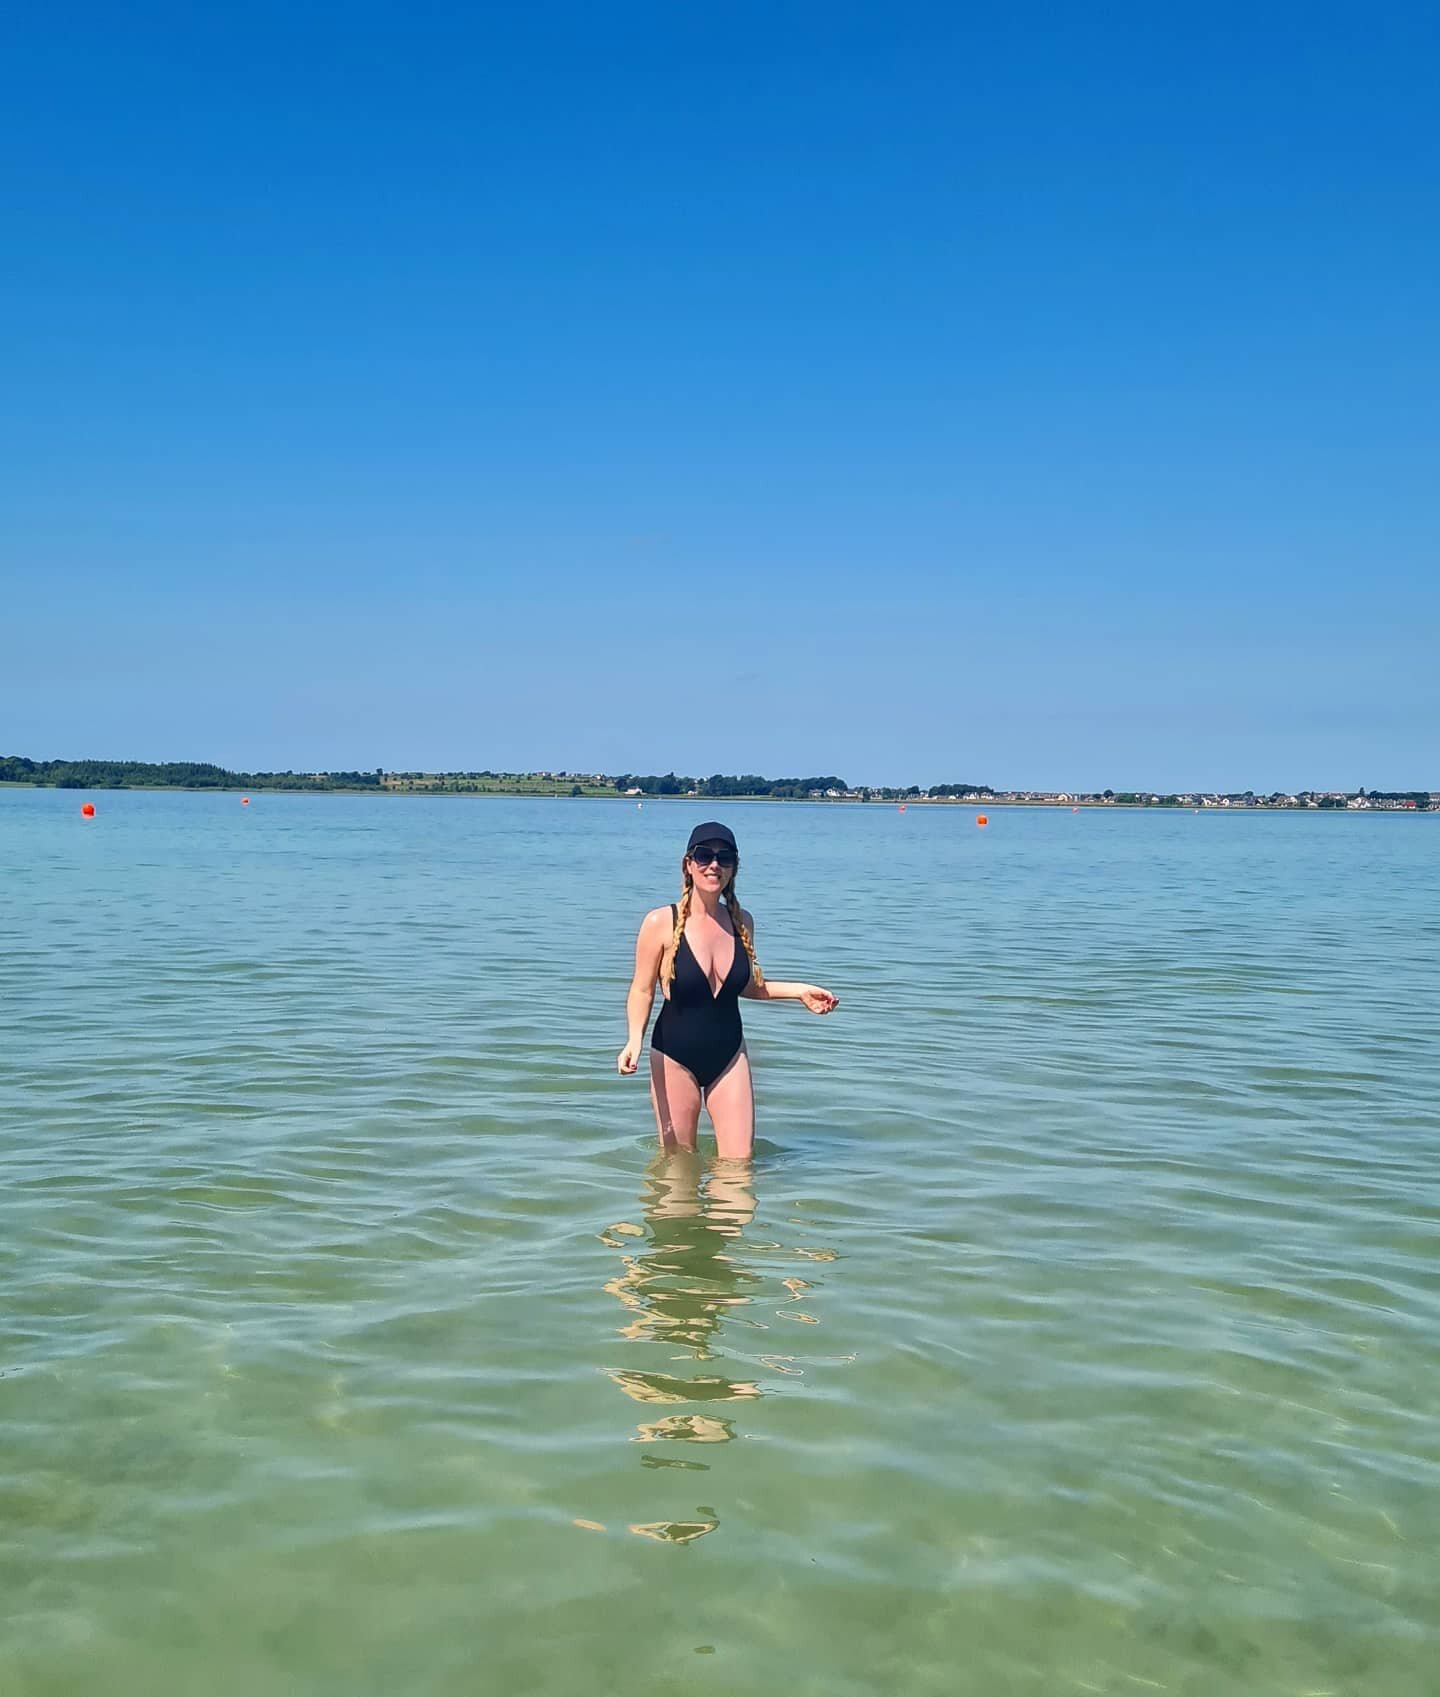 Galway or somewhere on a tropical island 🤔
Hope you are all enjoying this unbelievable weather, we had a lovely day at the lake today 🥰